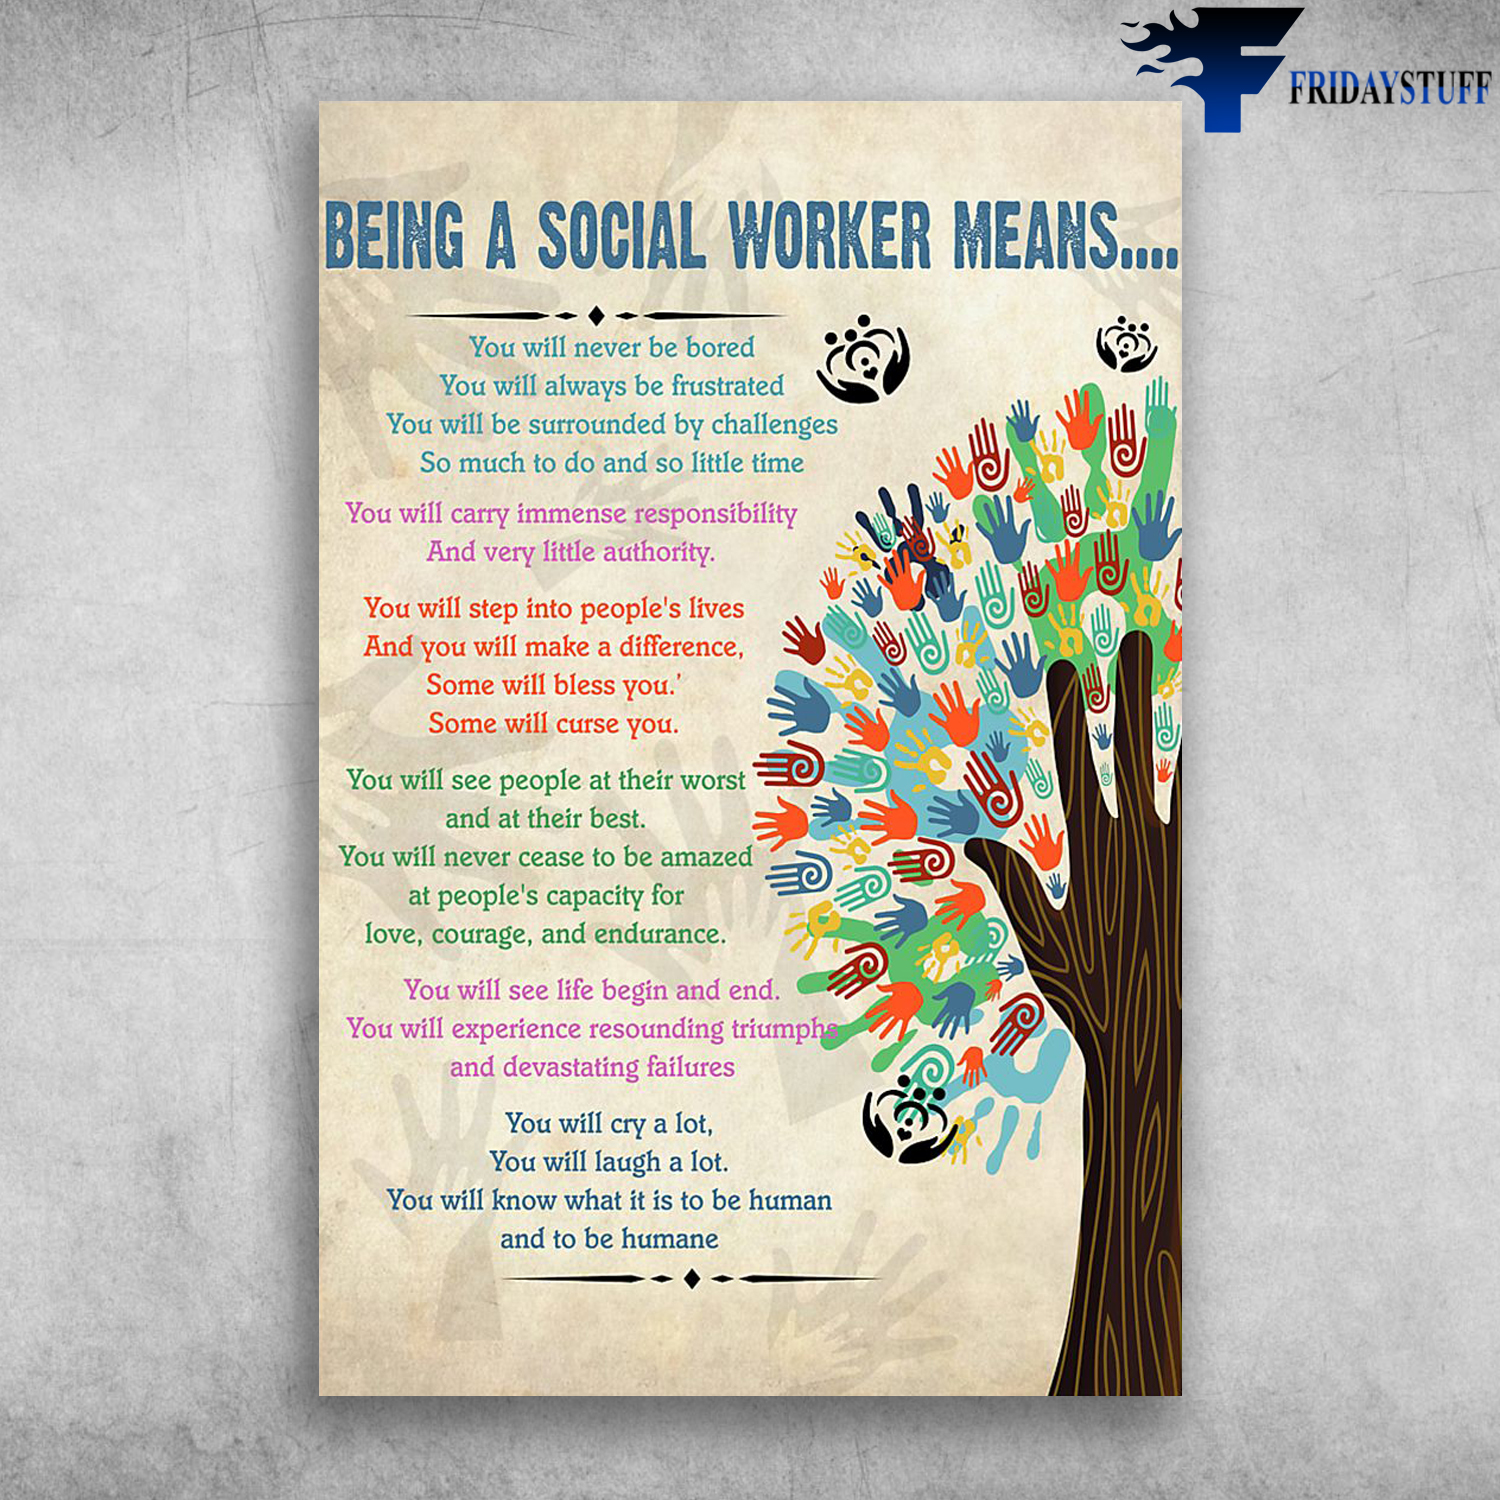 Being A Social Worker Means You Will Experience Resounding Triumphs